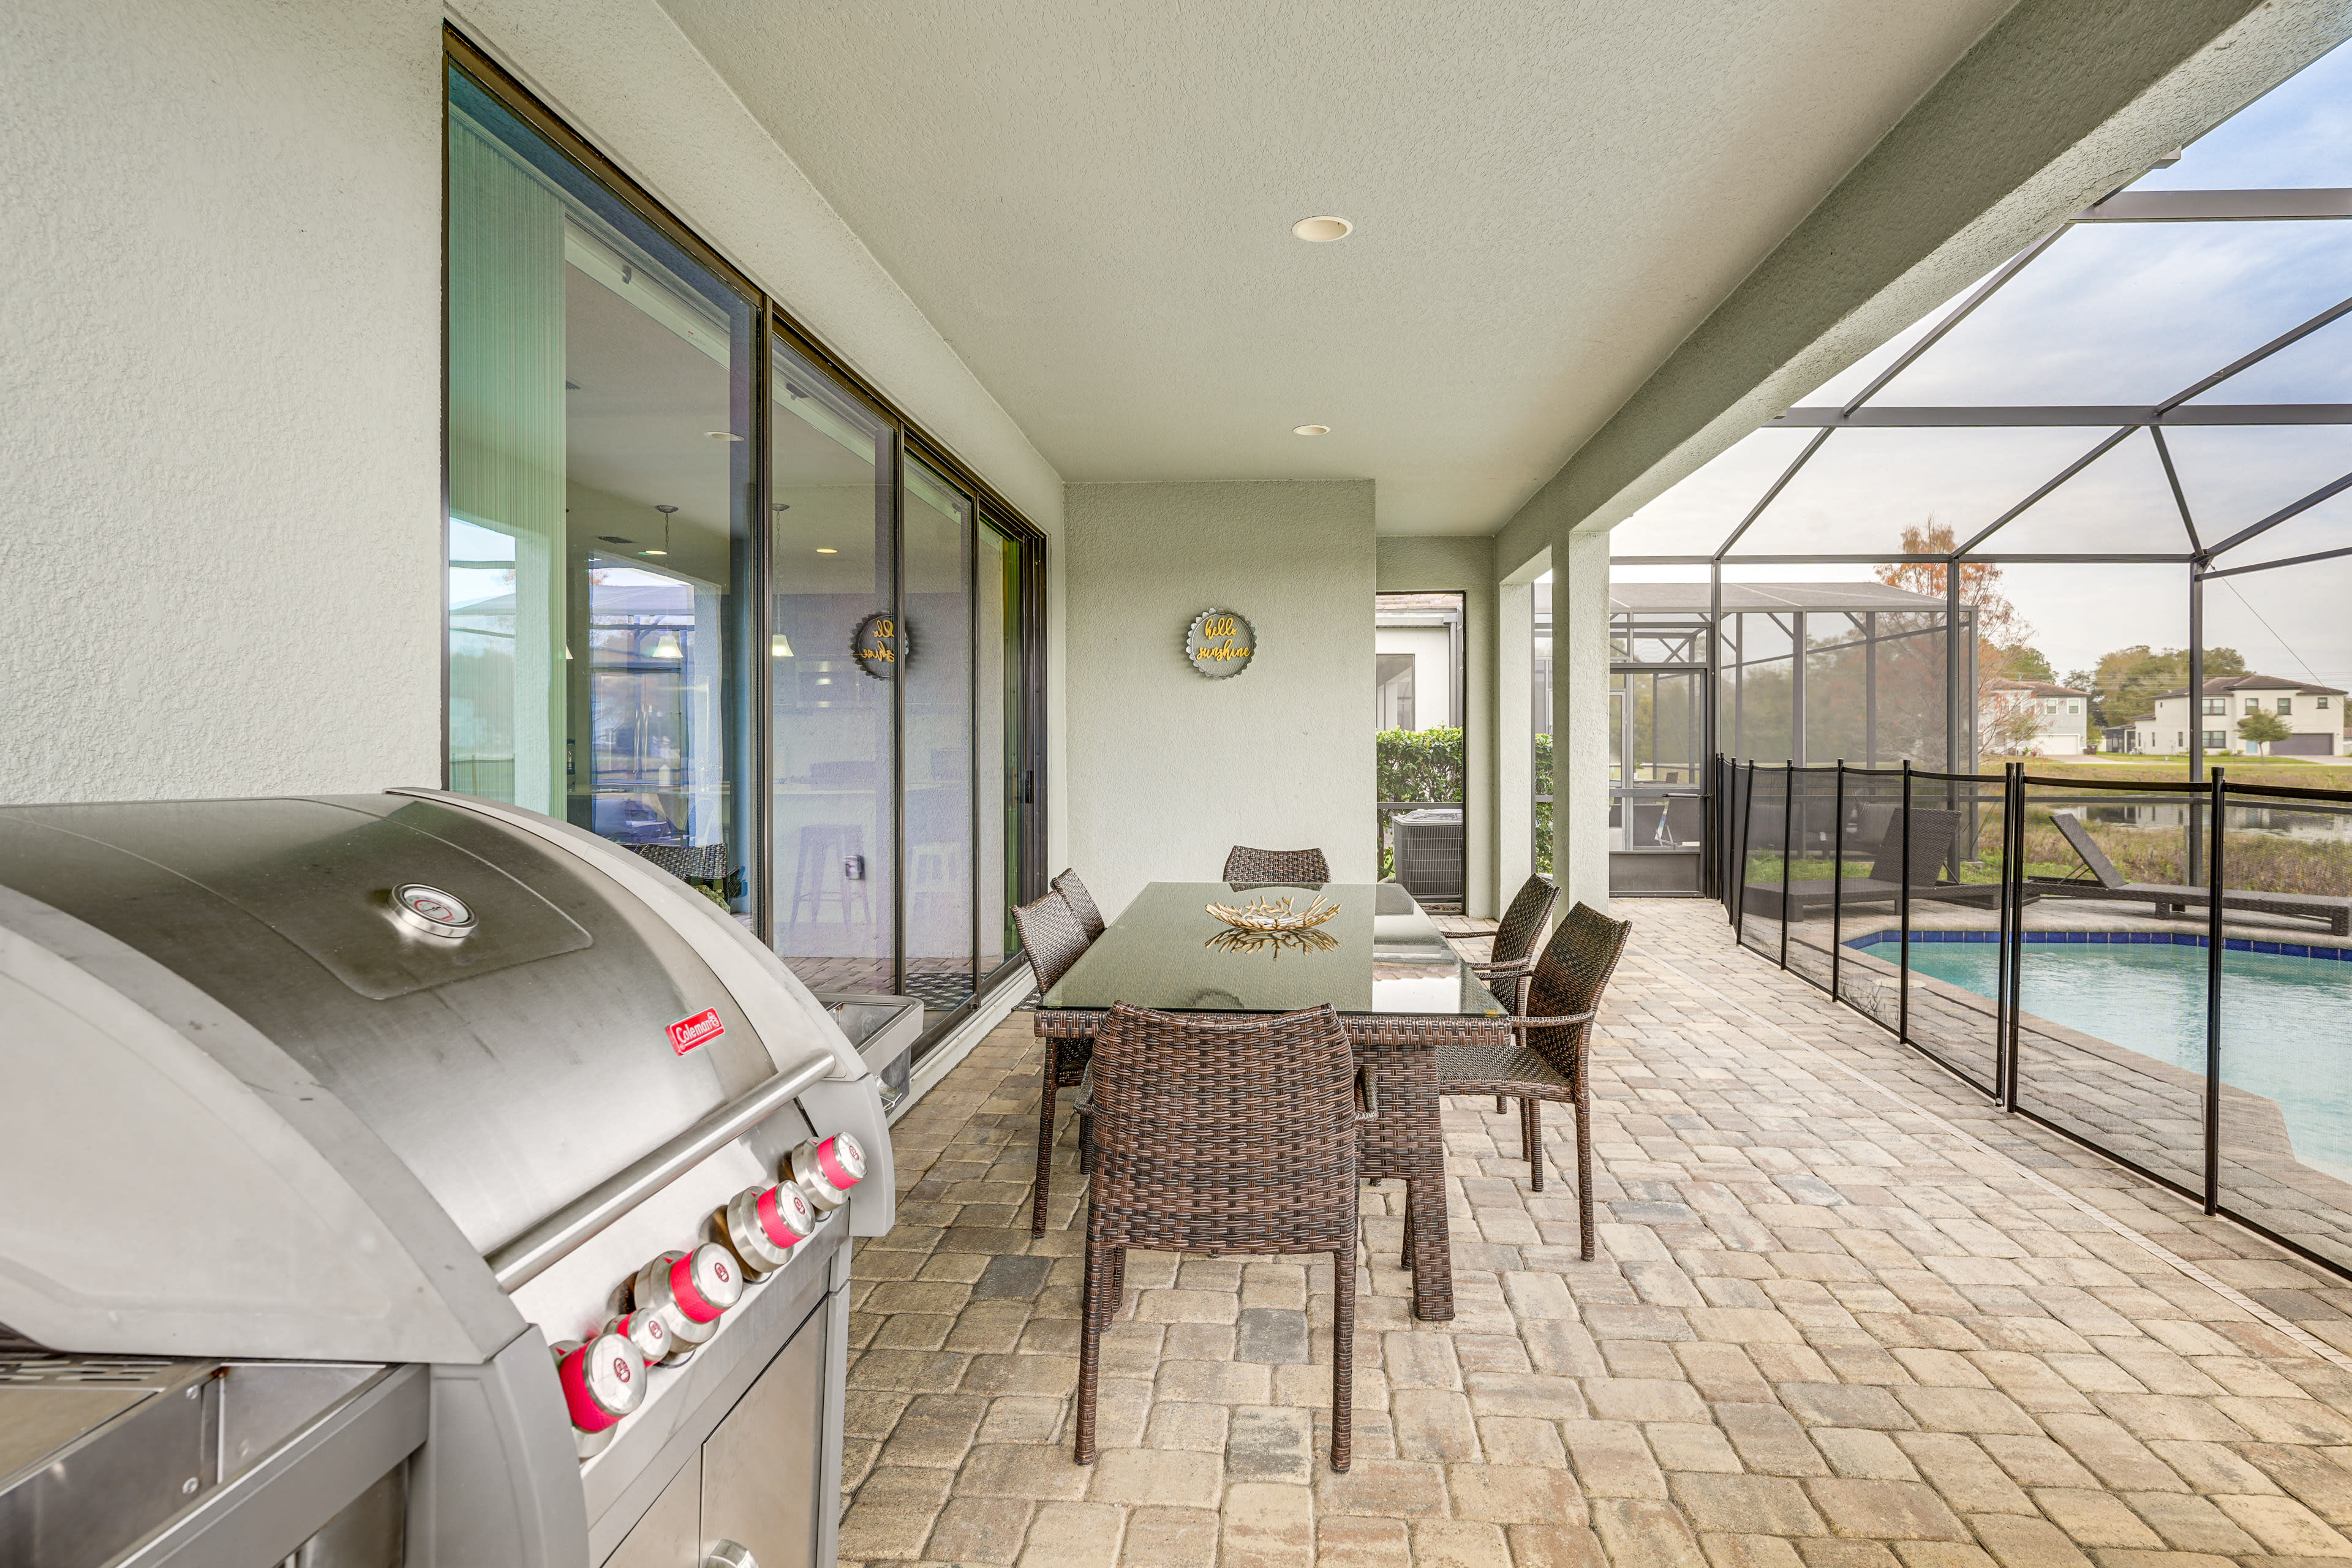 Screened Lanai | Gas Grill | Dining Area | Outdoor Pool